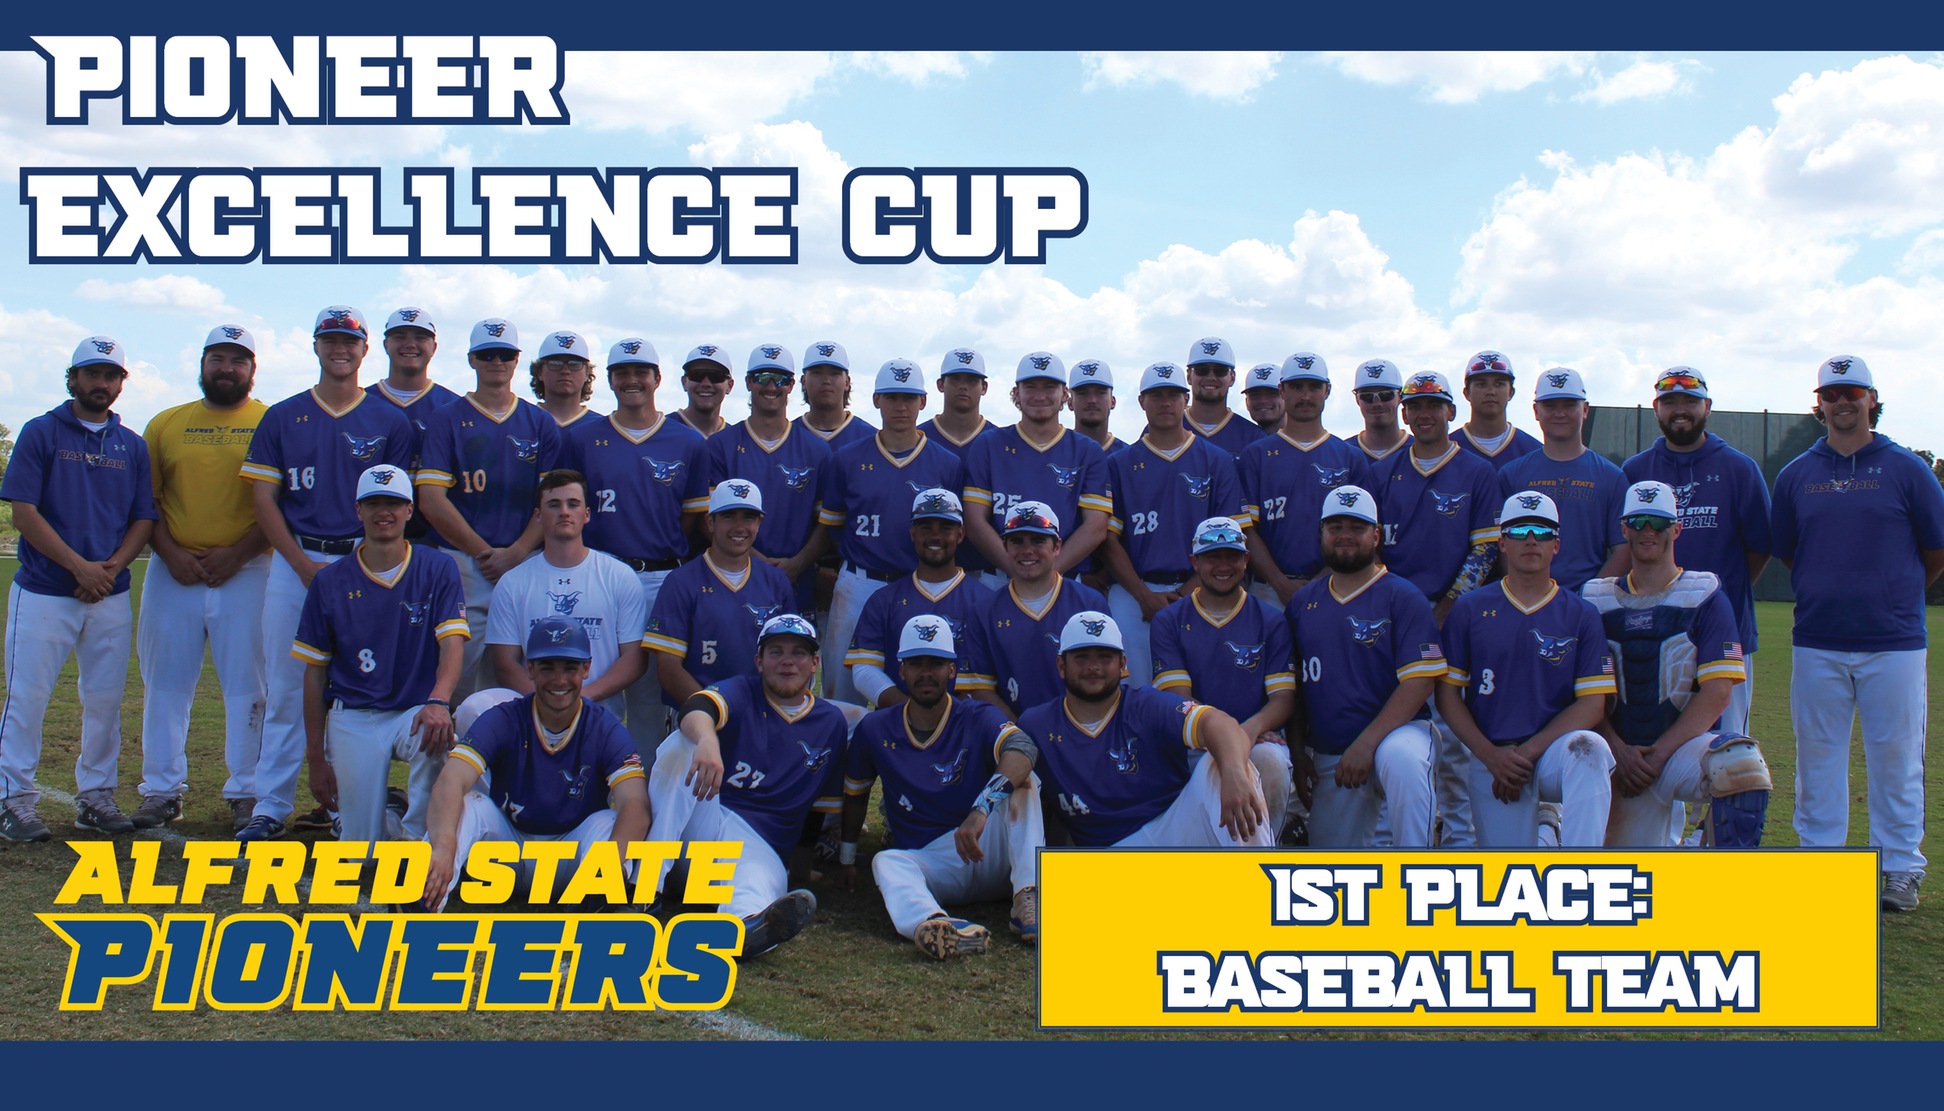 Alfred State baseball team wins the 2019-20 Pioneer Excellence Cup